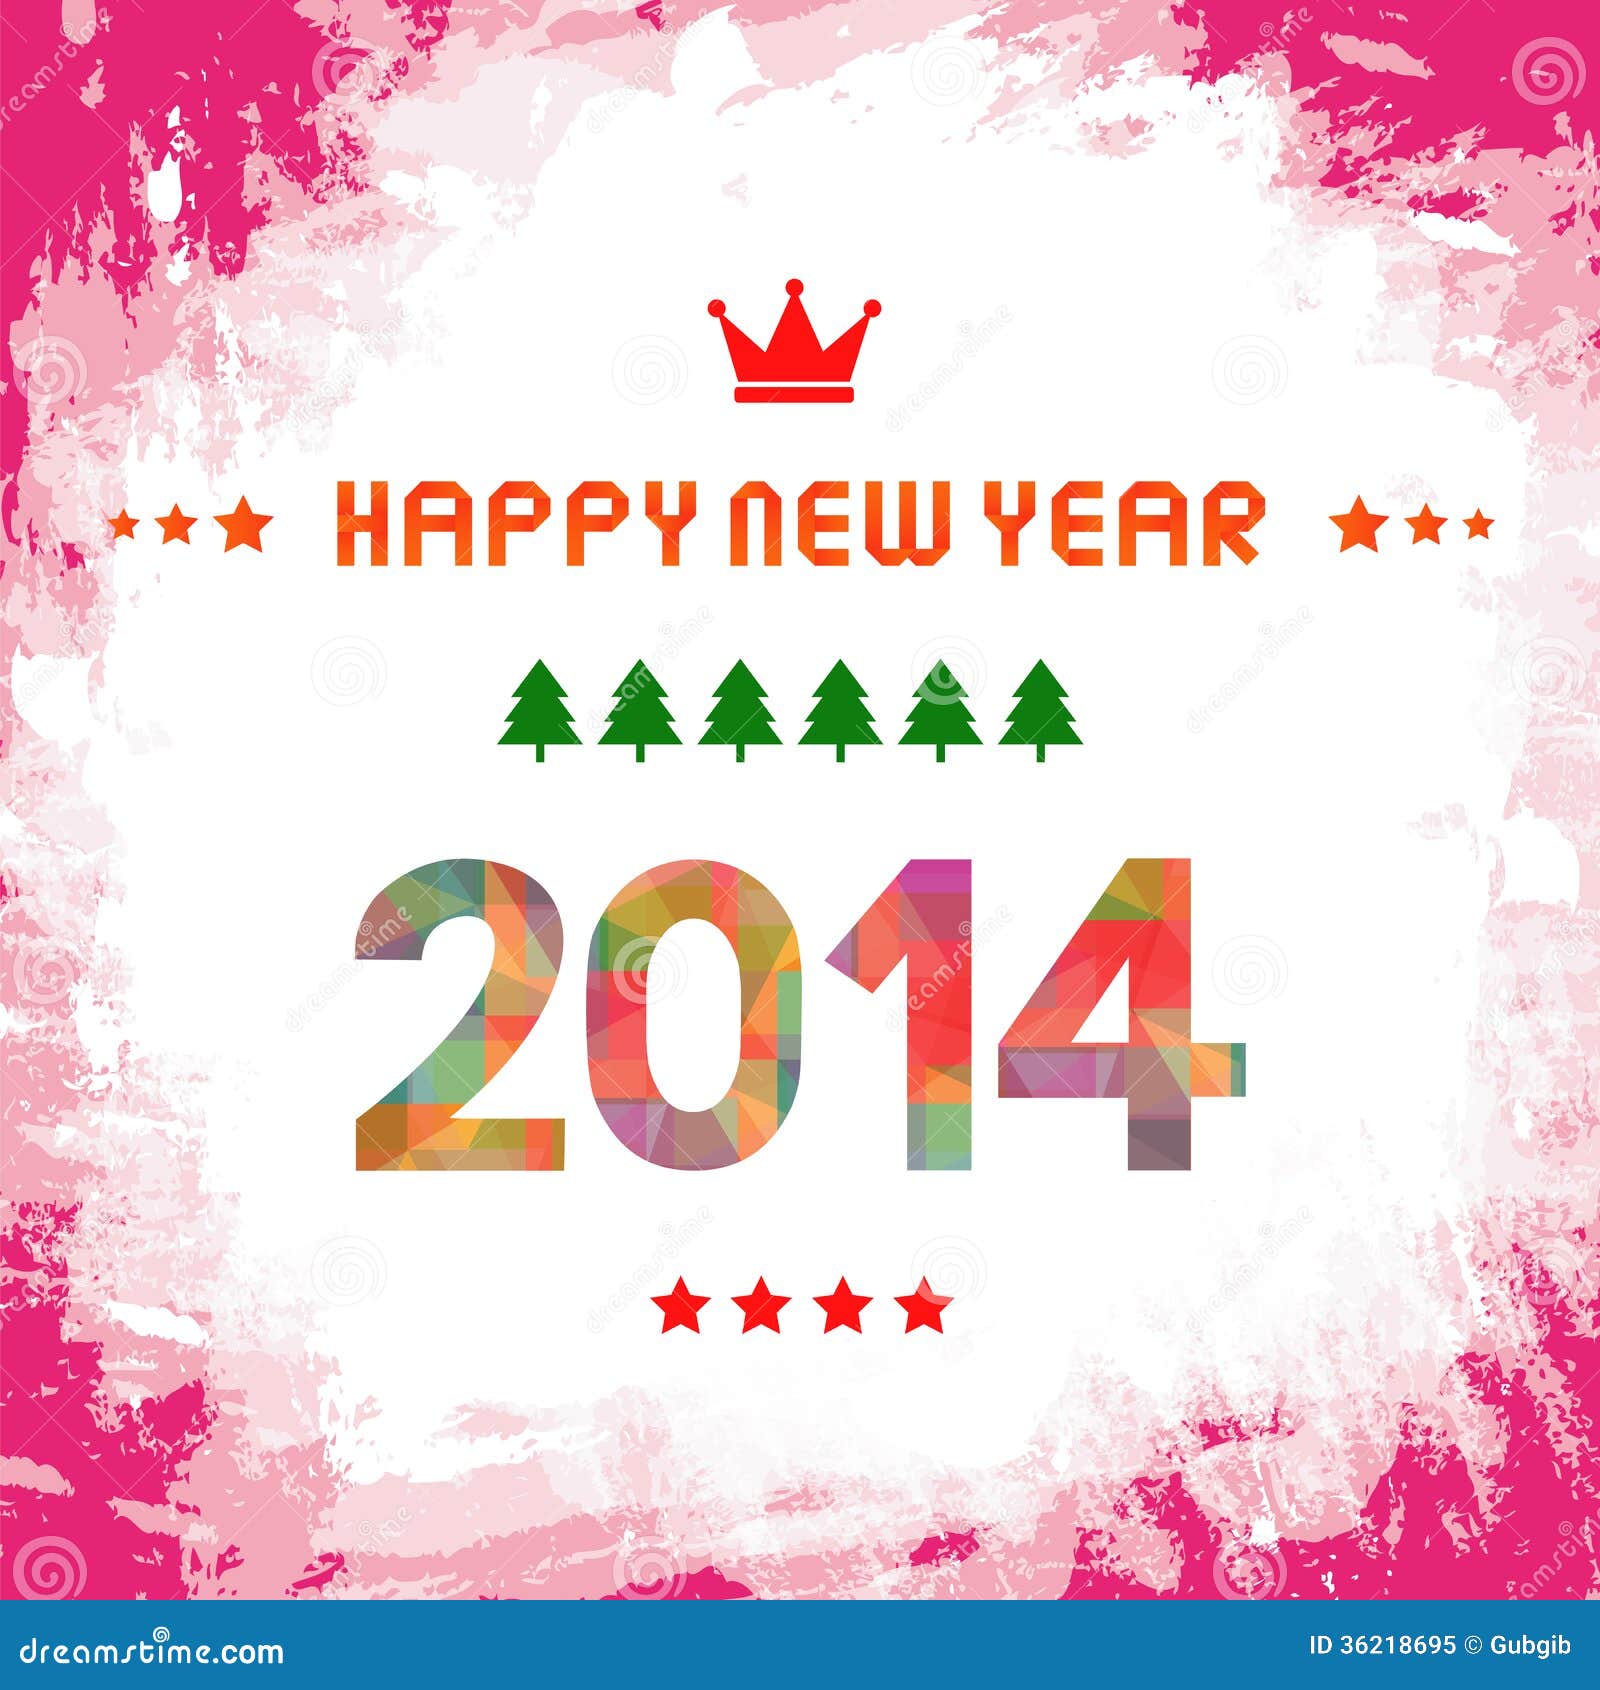 free animated clipart happy new year 2014 - photo #42